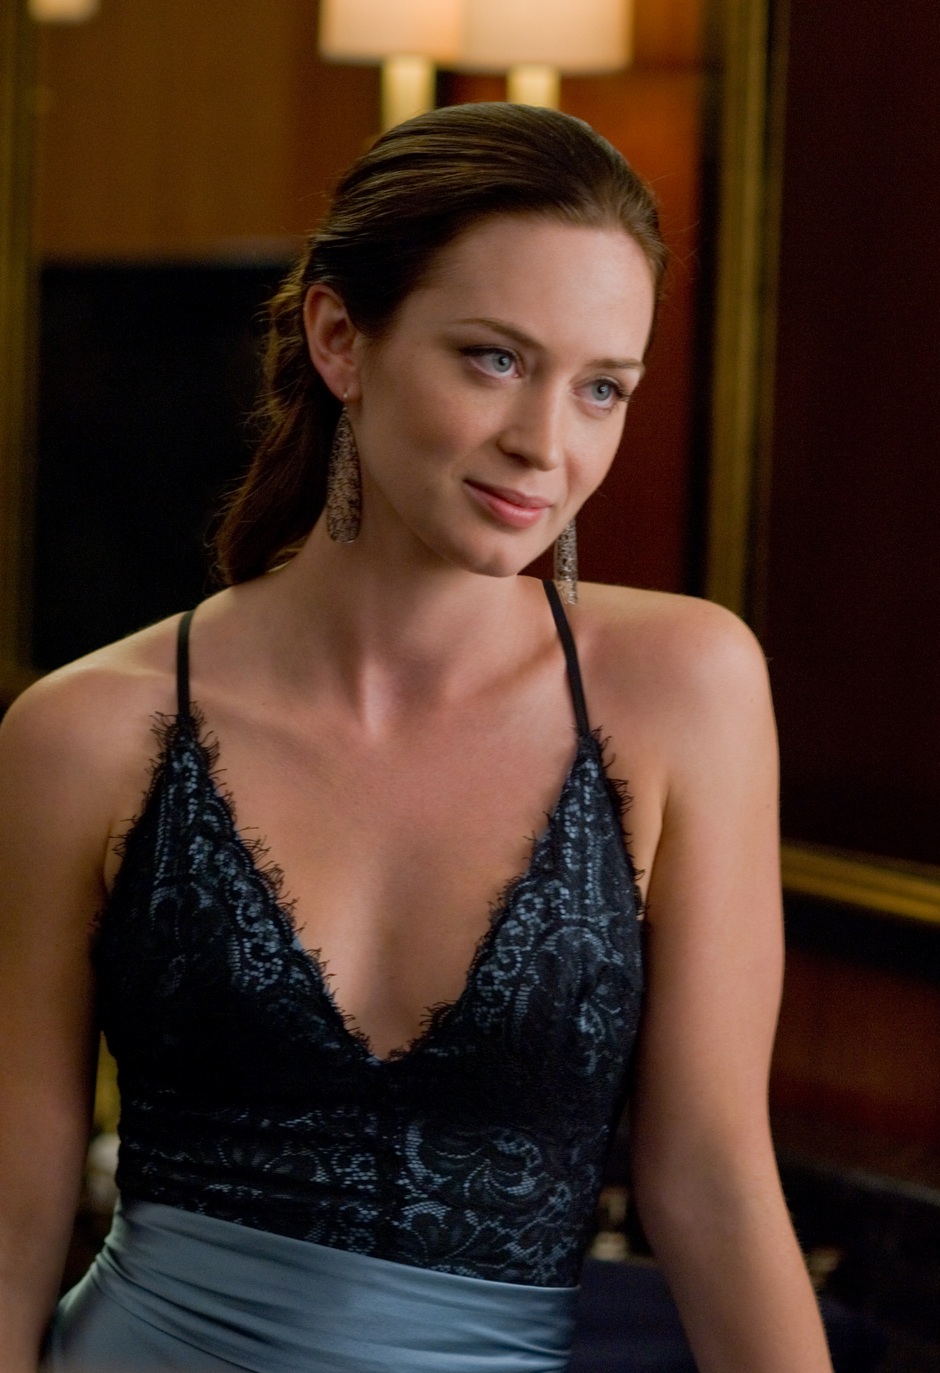 Emily blunt the fappening